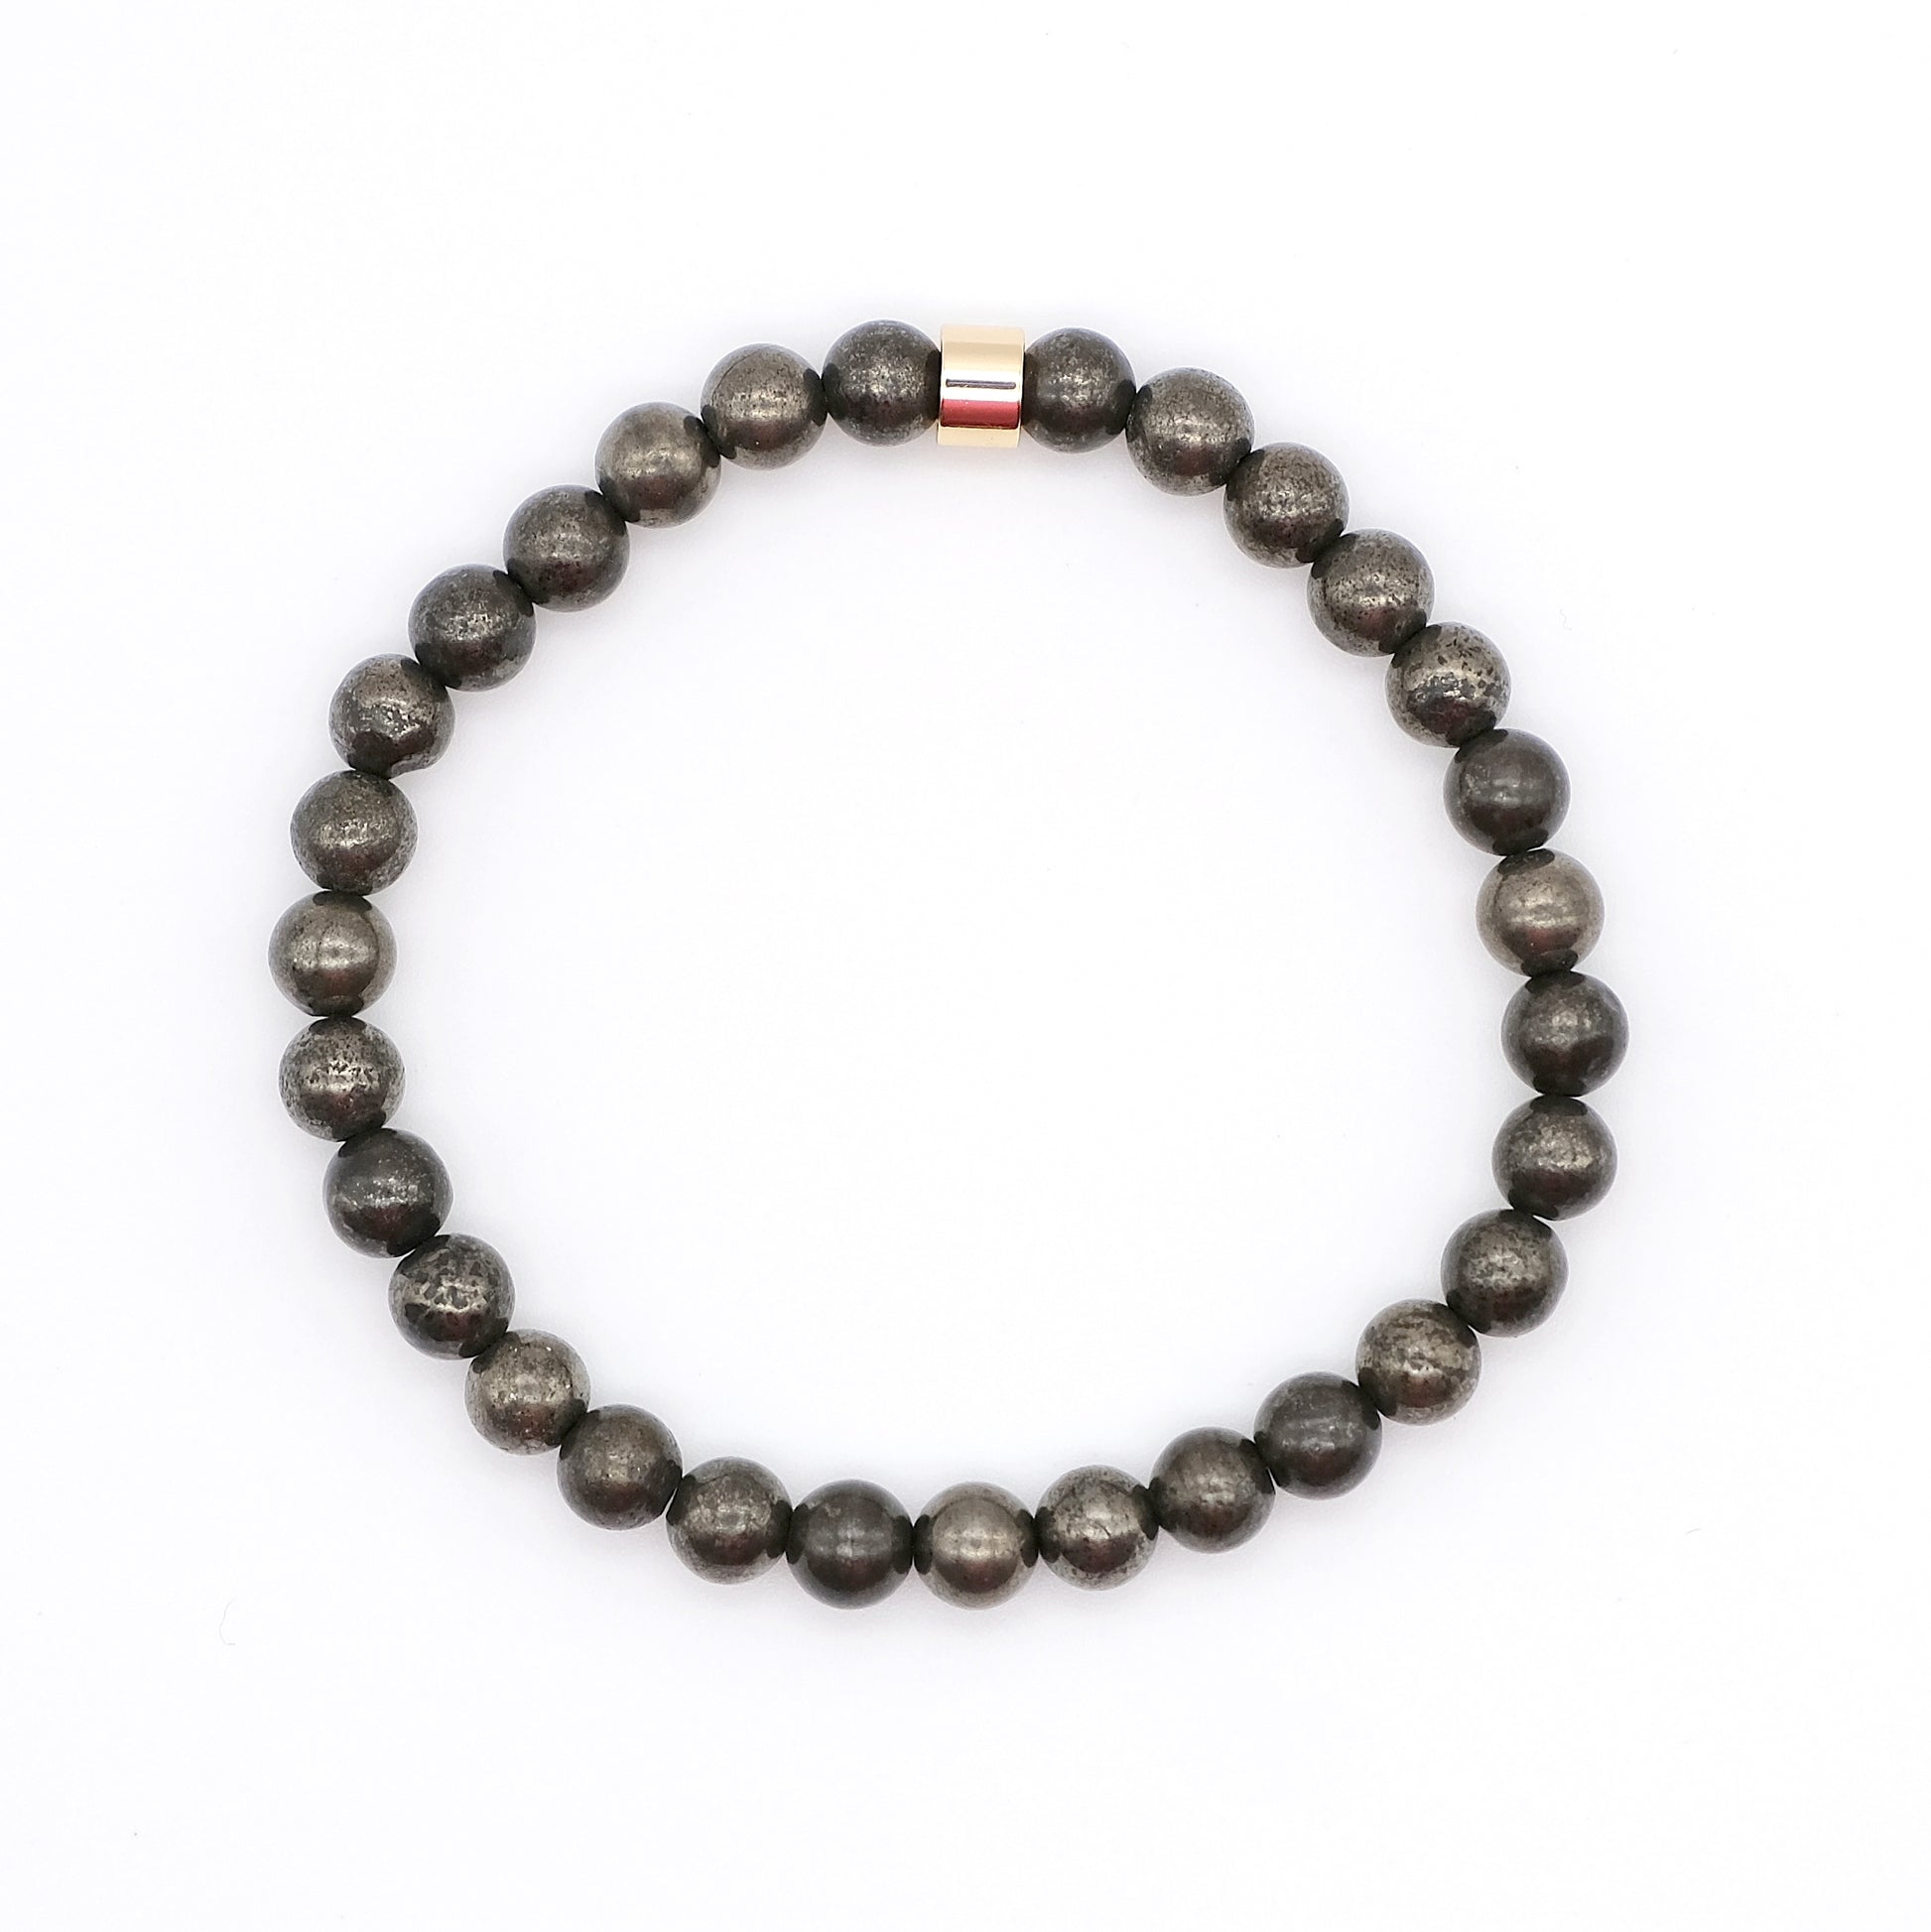 A pyrite gemstone bracelet in 5mm beads with gold accessory from above